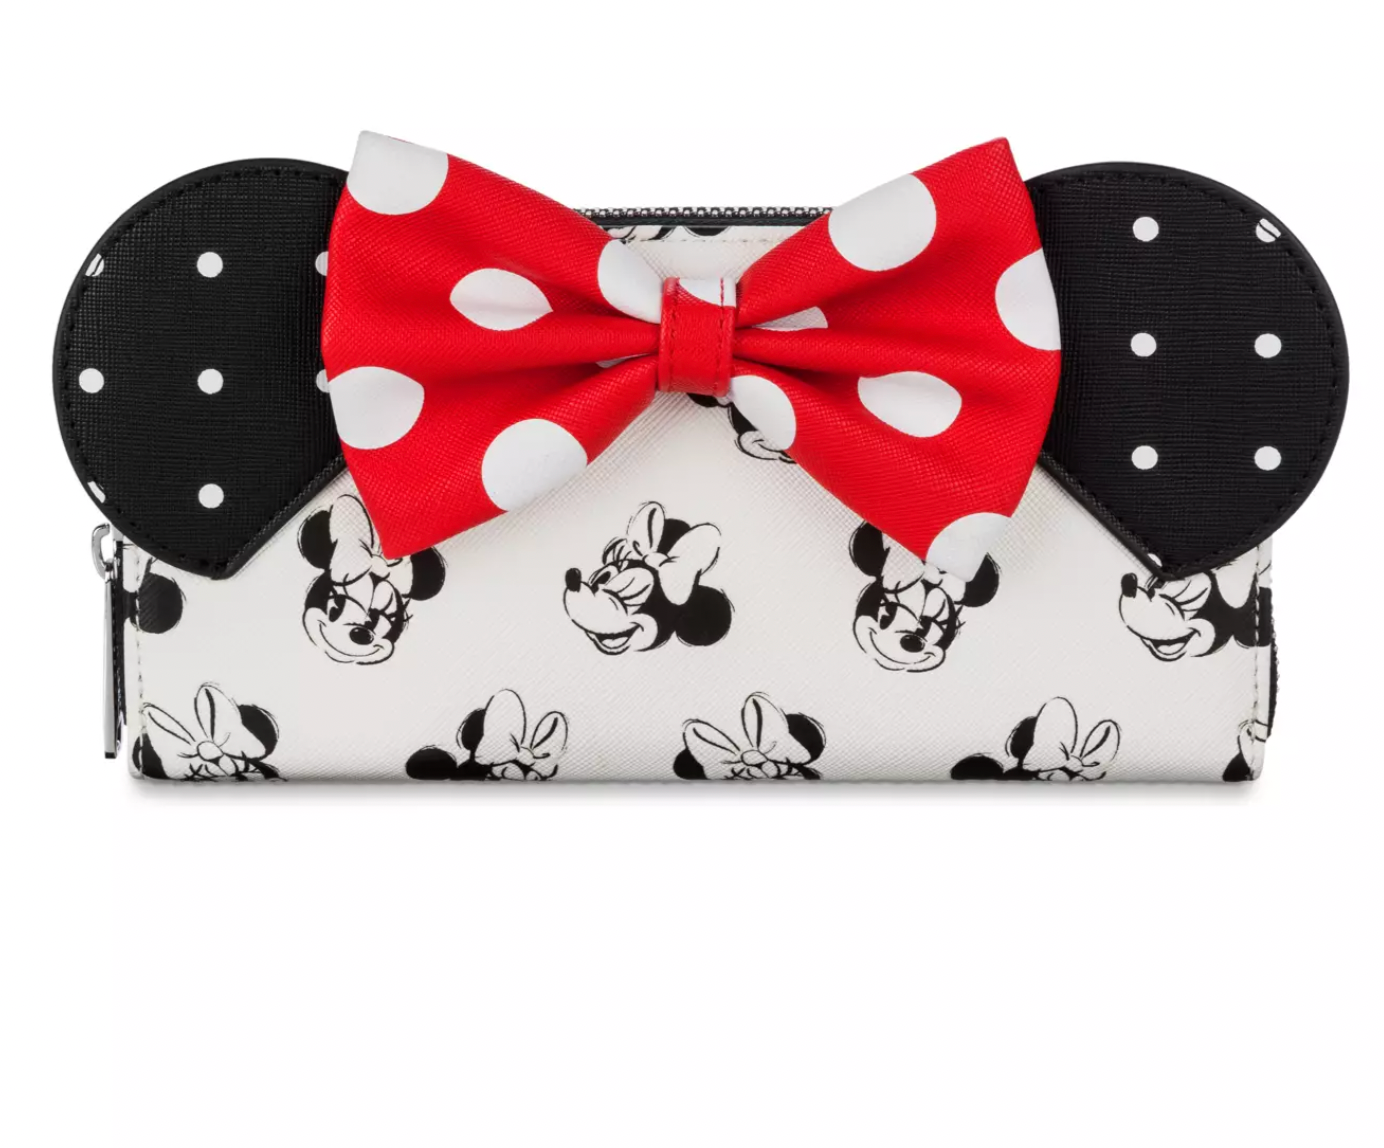 Disney Parks Minnie Black and Red Bow Polka Dot Wallet New with Tag